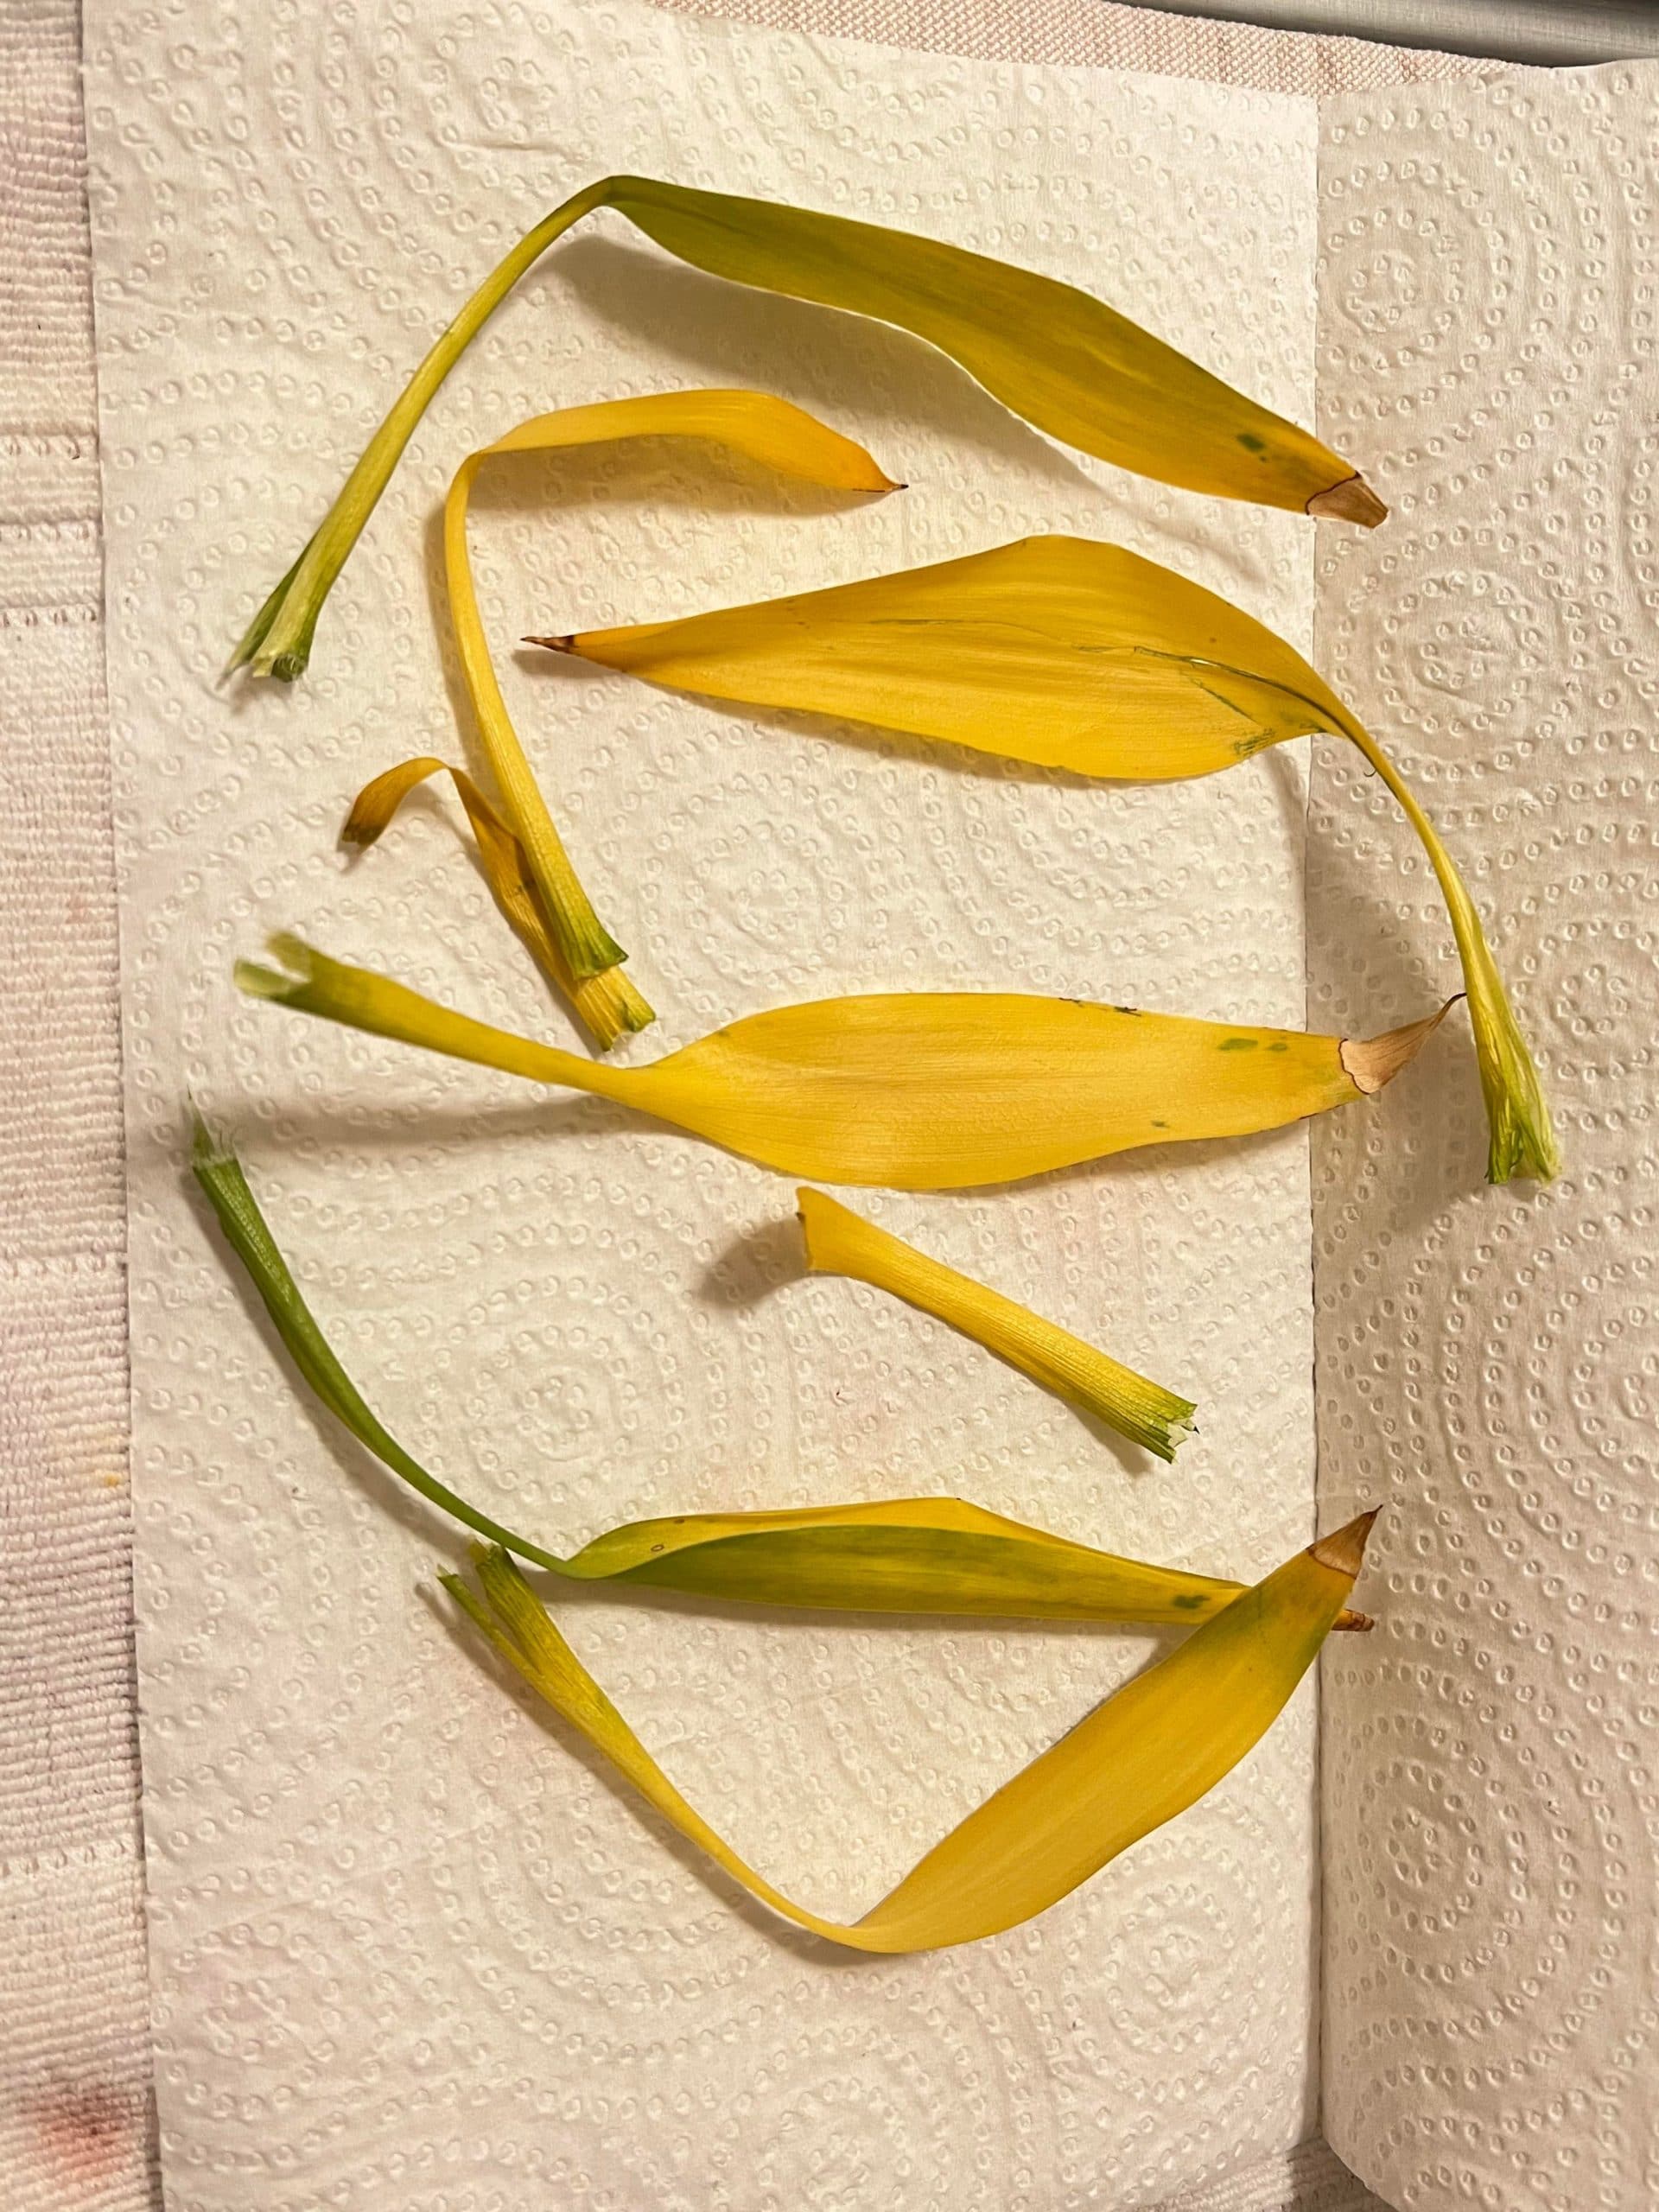 11yo lucky bamboo leaves turning yellow - Why are my bamboo leaves turning yellow?